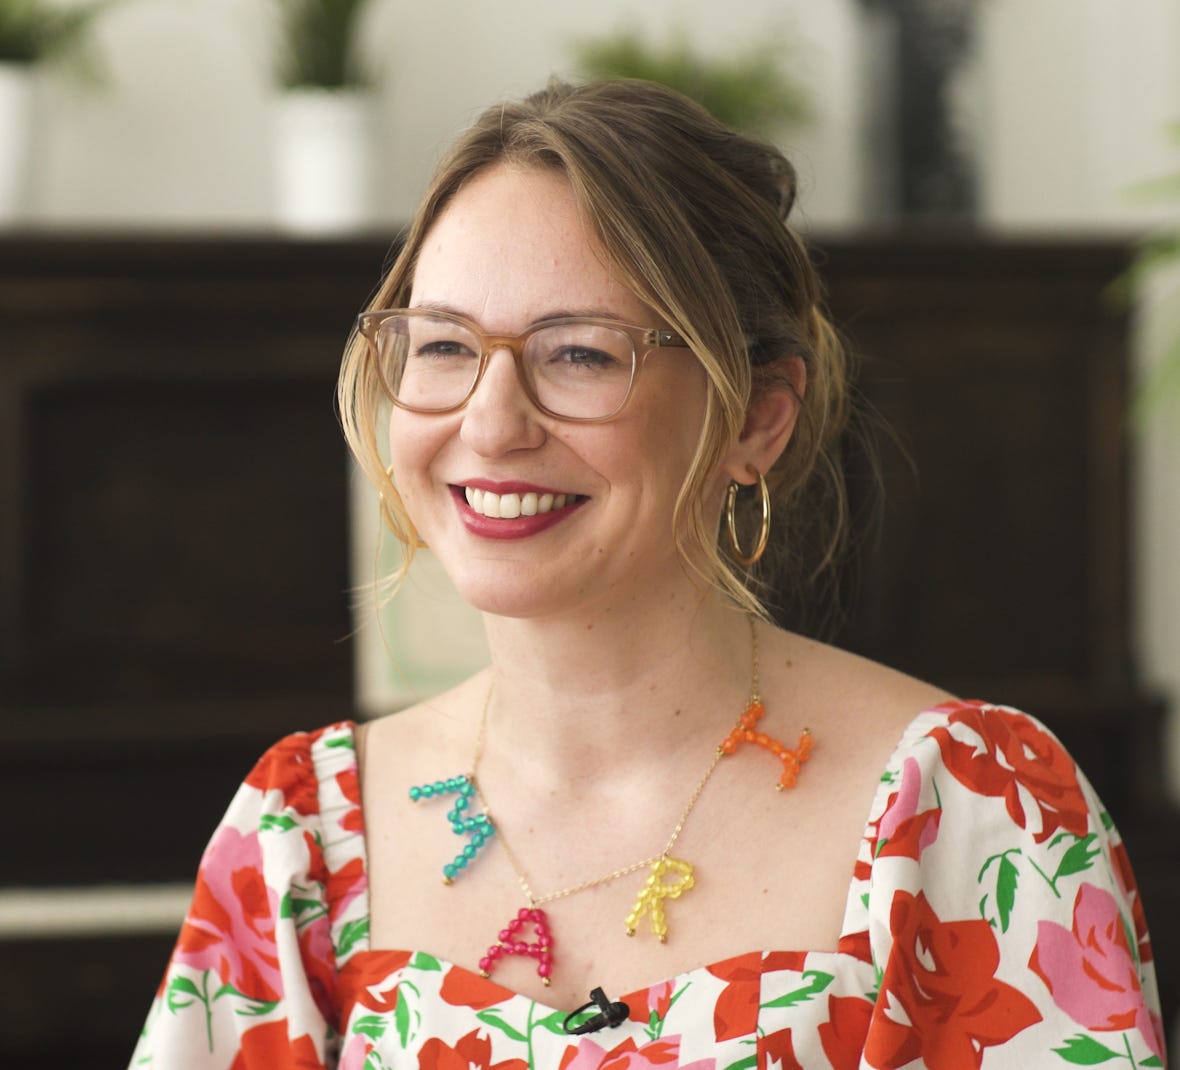 A women with light hair, brown glasses, and big hoop earrings smiles at something off camera. She is in a vibrant floral top and wears a colorful necklace that spells MARI.